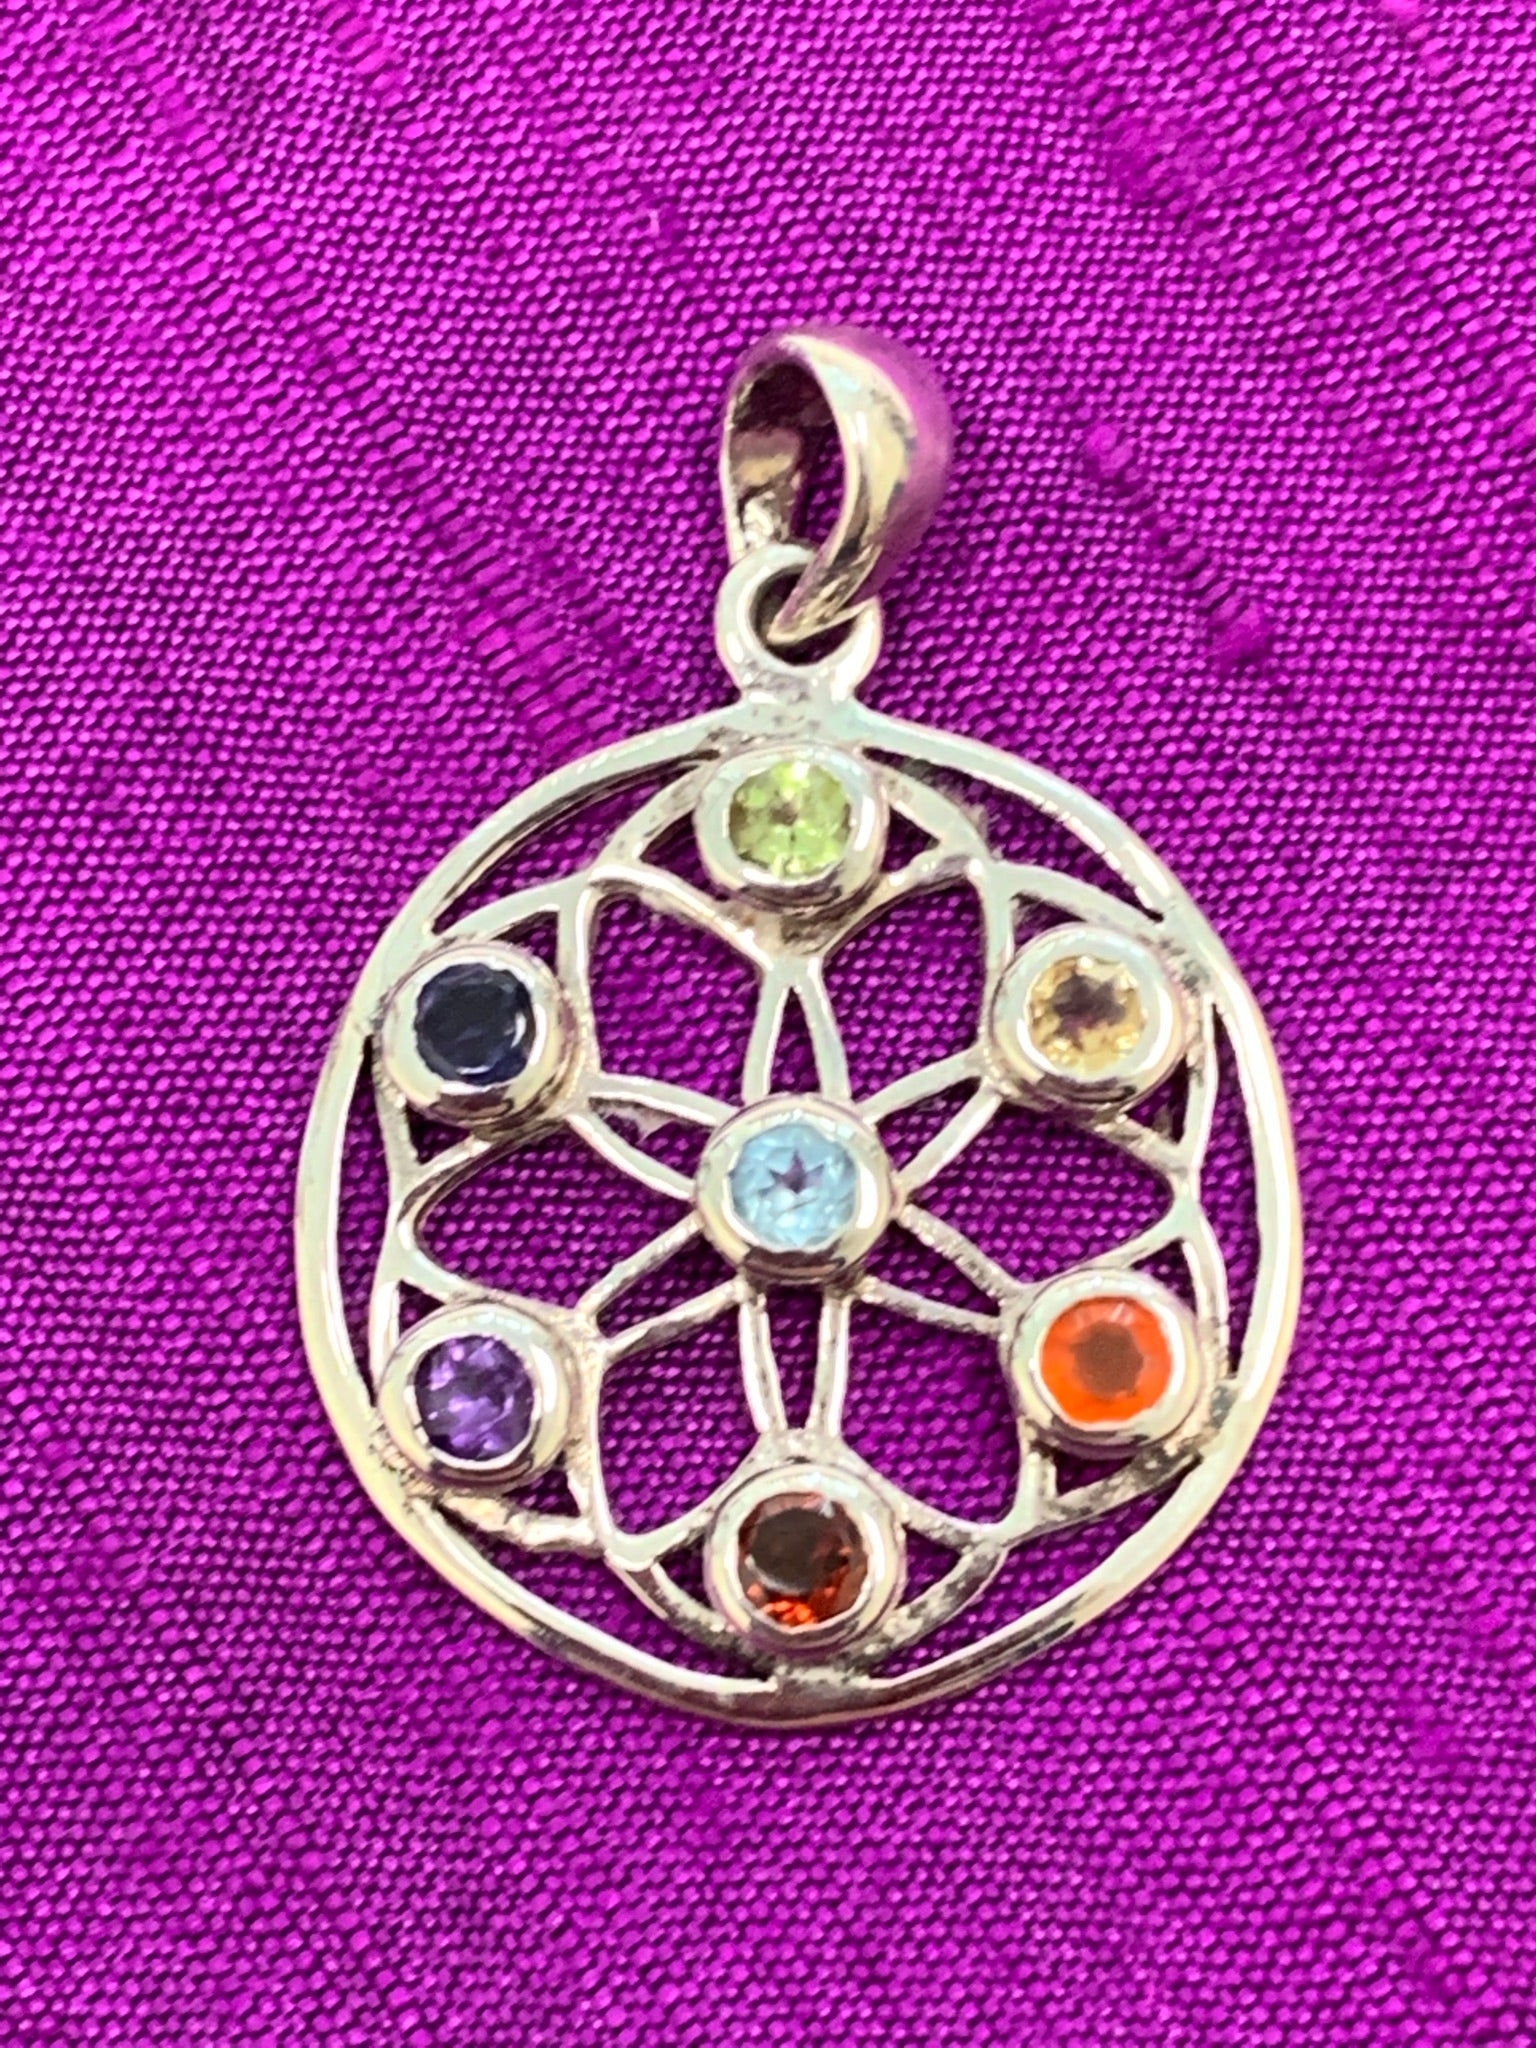 Close-up view. Beautiful chakra wheel pendant with seven small faceted stones around the wheel, each representing one of the 7 major chakras. Stones are set in sterling silver wheel. Chakras are energy centers in our bodies that process energy - coming into and flowing out of the body. The pendant is approximately 1¼".